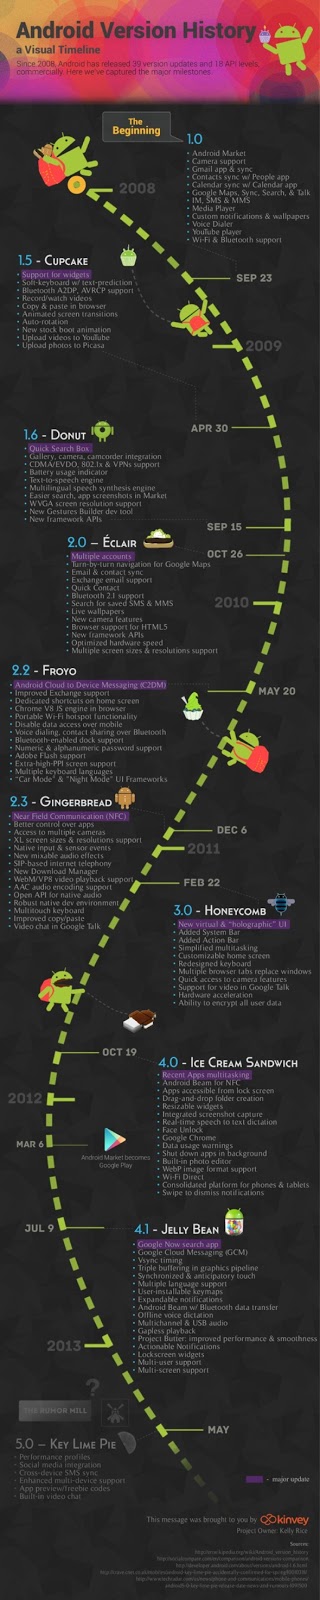 Google's Android Version History